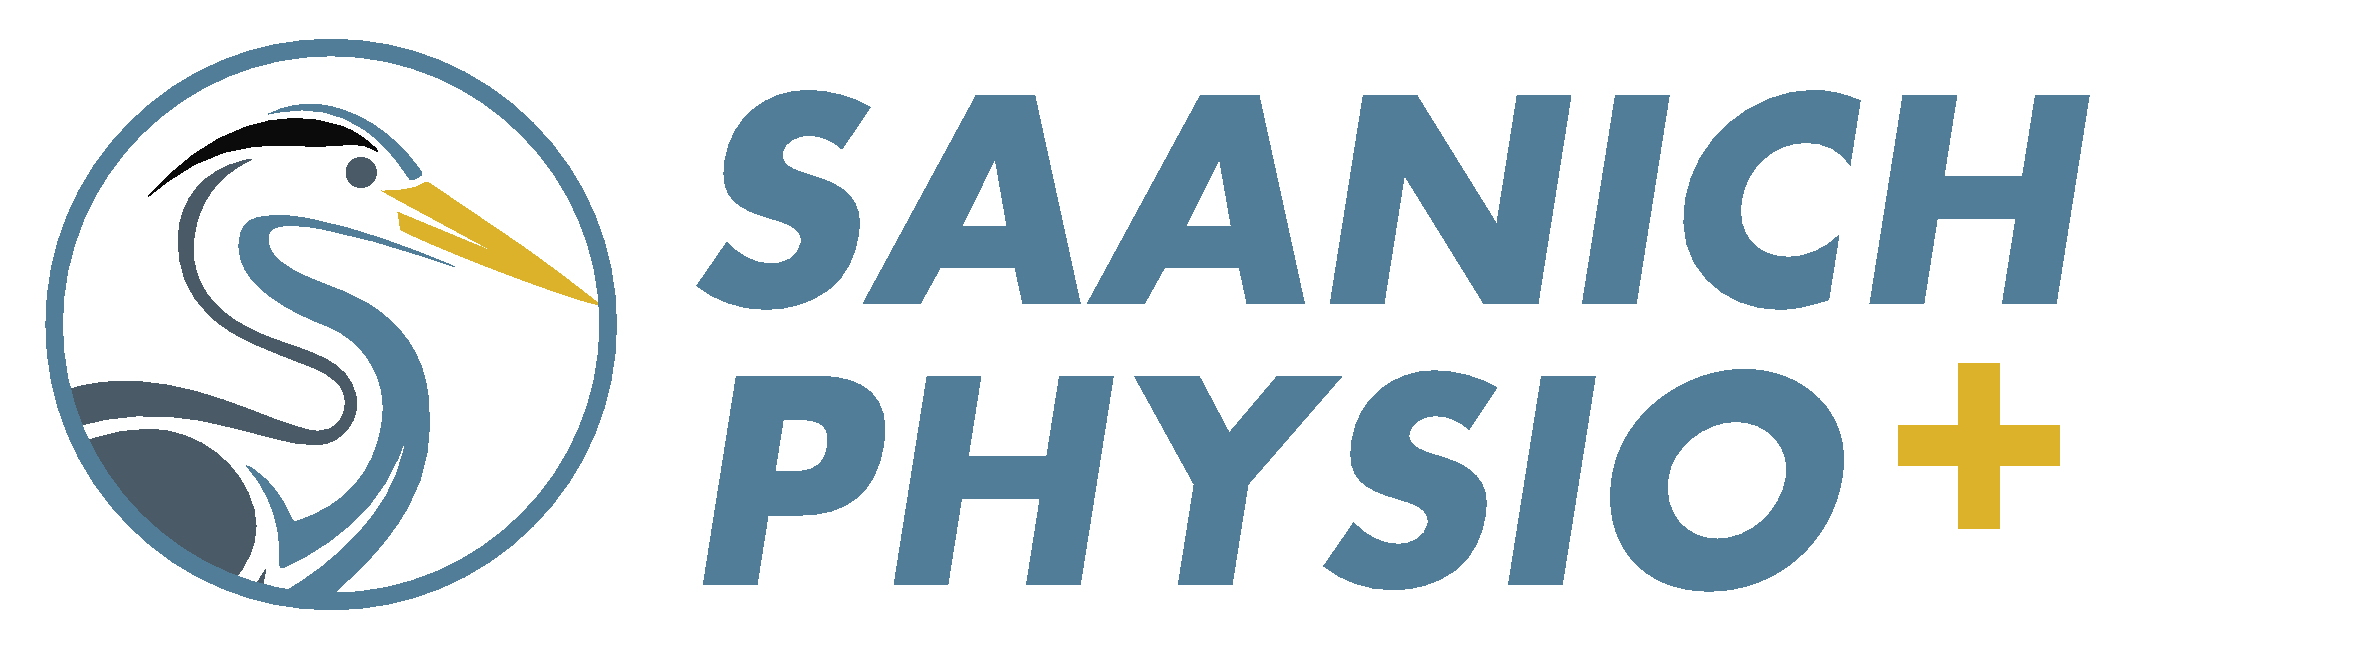 Saanich Physiotherapy & Sports Clinic